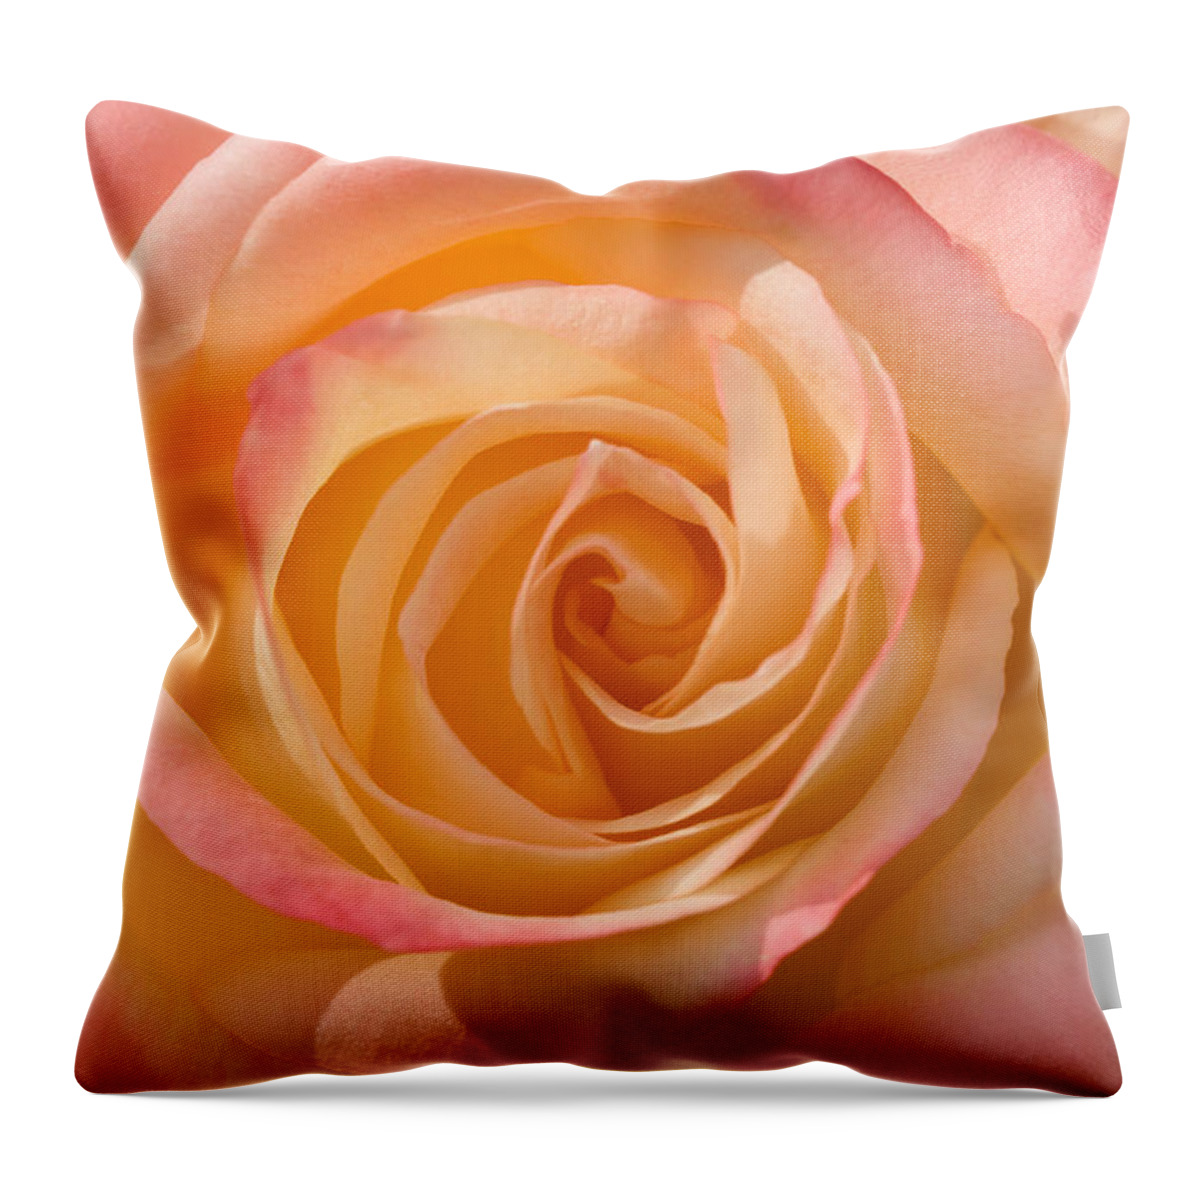 Rose Throw Pillow featuring the photograph Blushing Rose by Sarah Schroder